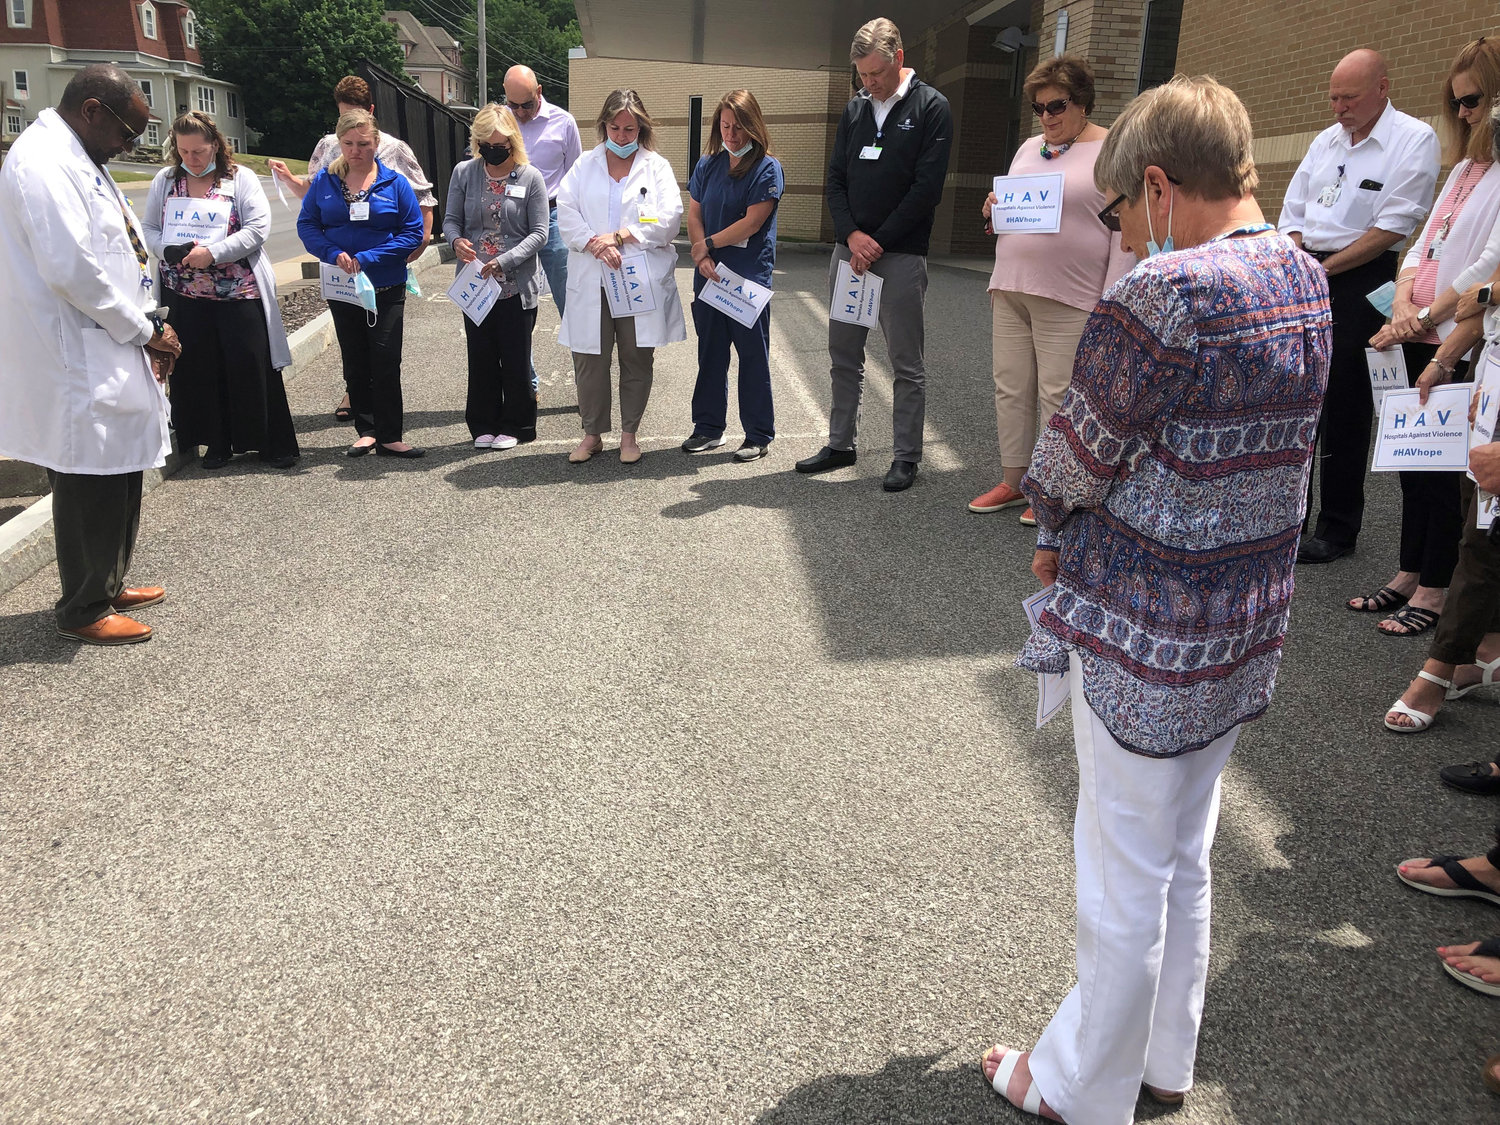 Employees gather for a moment of silence at Bassett Medical Center, A.O. Fox Hospital, and Little Falls Hospital, among other locations.